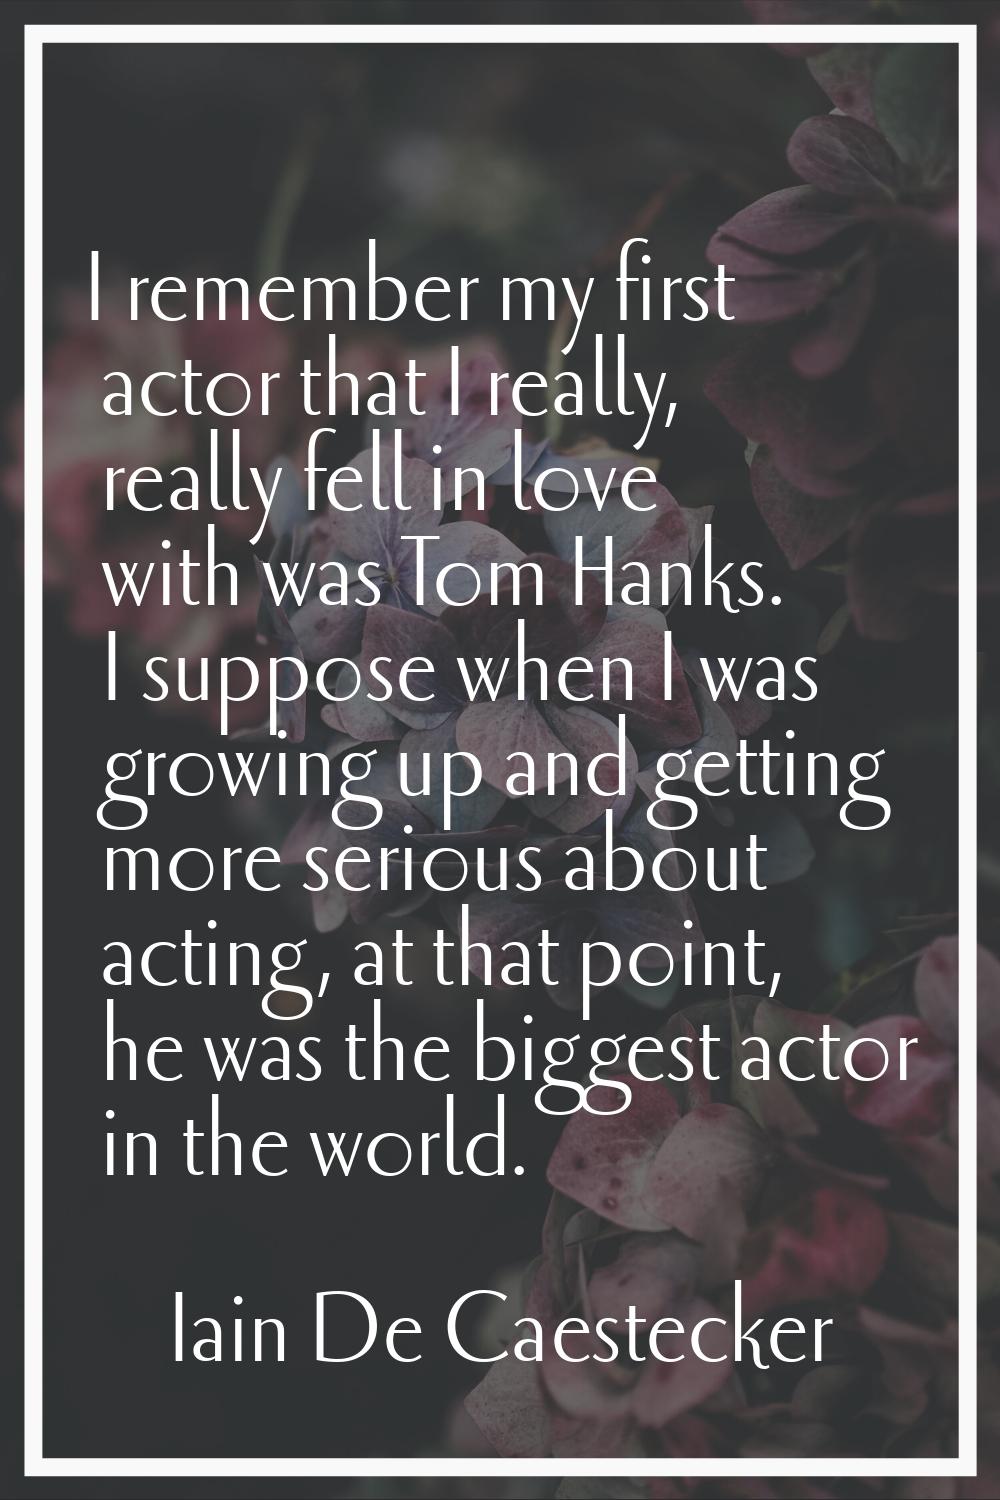 I remember my first actor that I really, really fell in love with was Tom Hanks. I suppose when I w